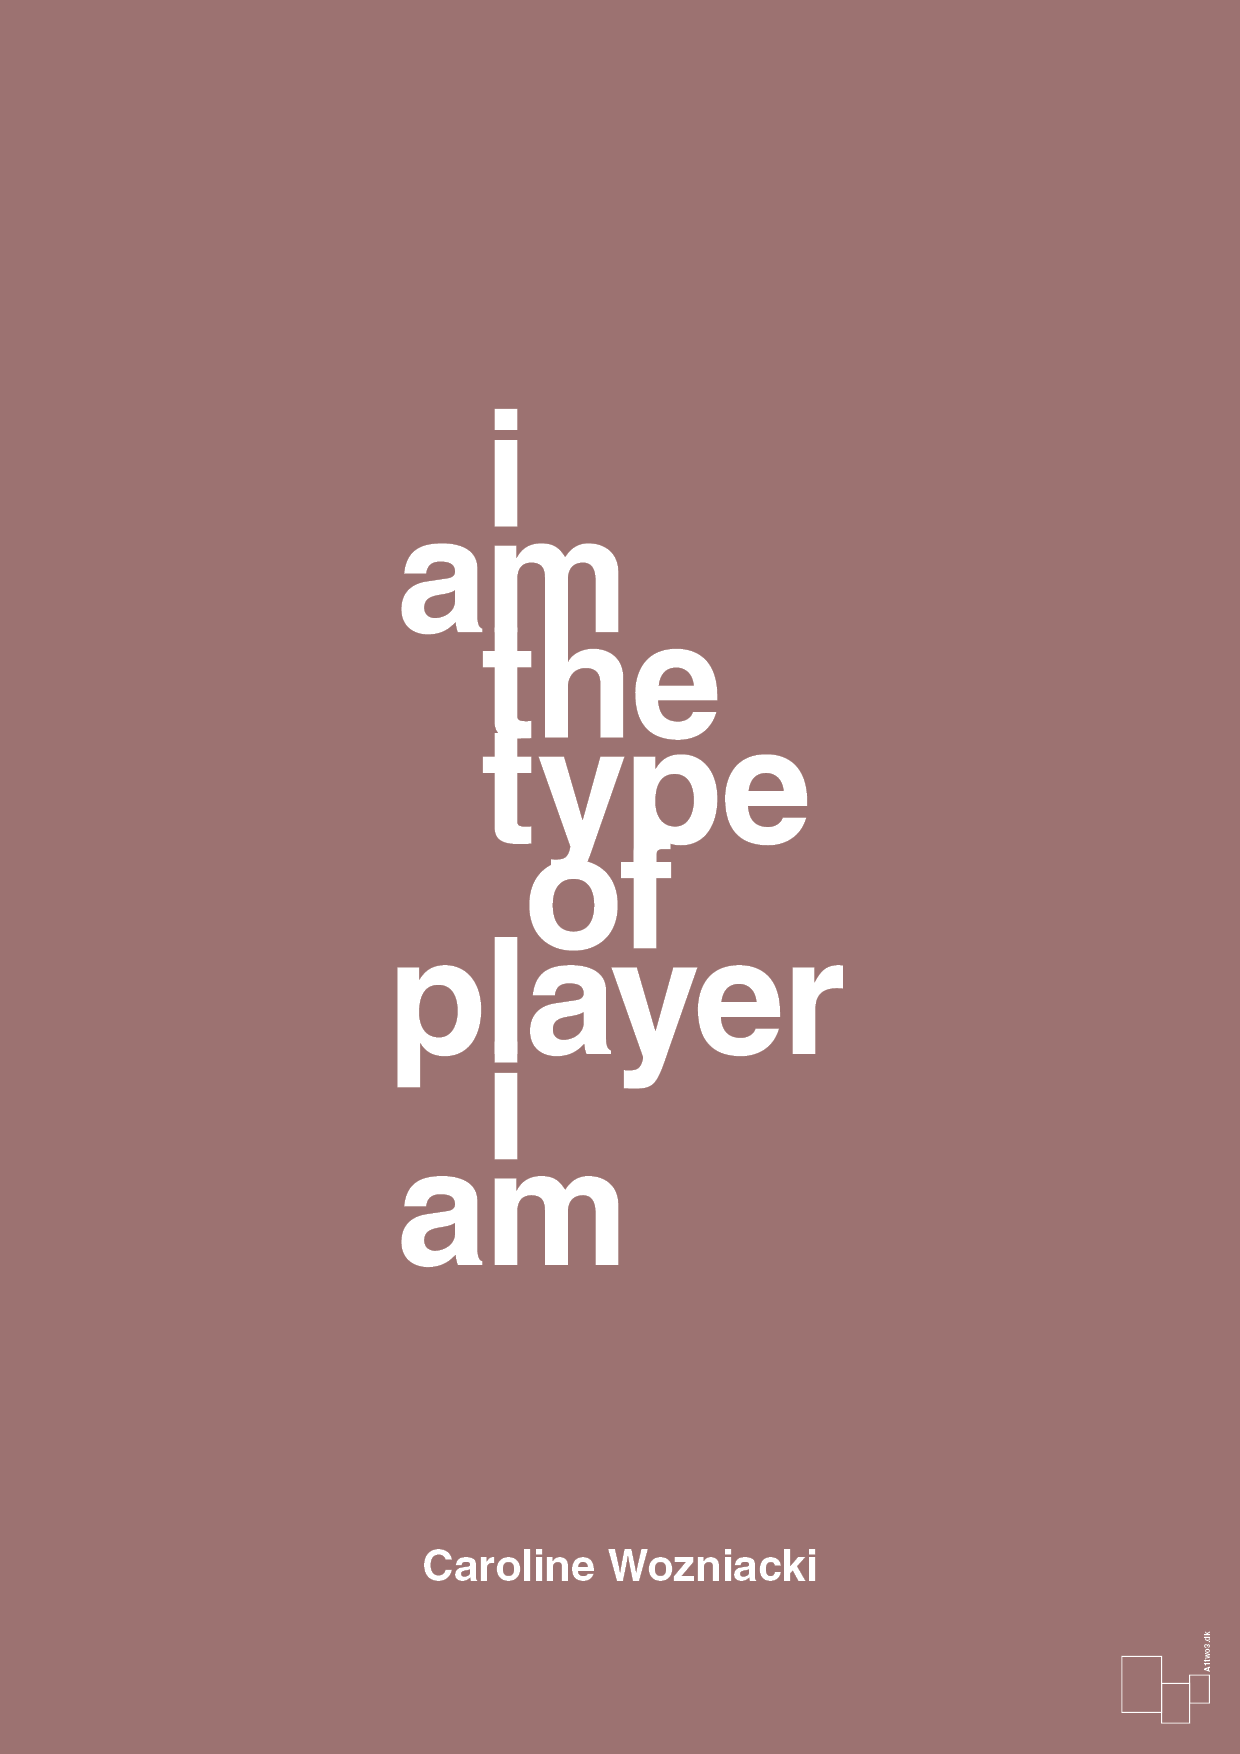 i am the type of player i am - Plakat med Citater i Plum